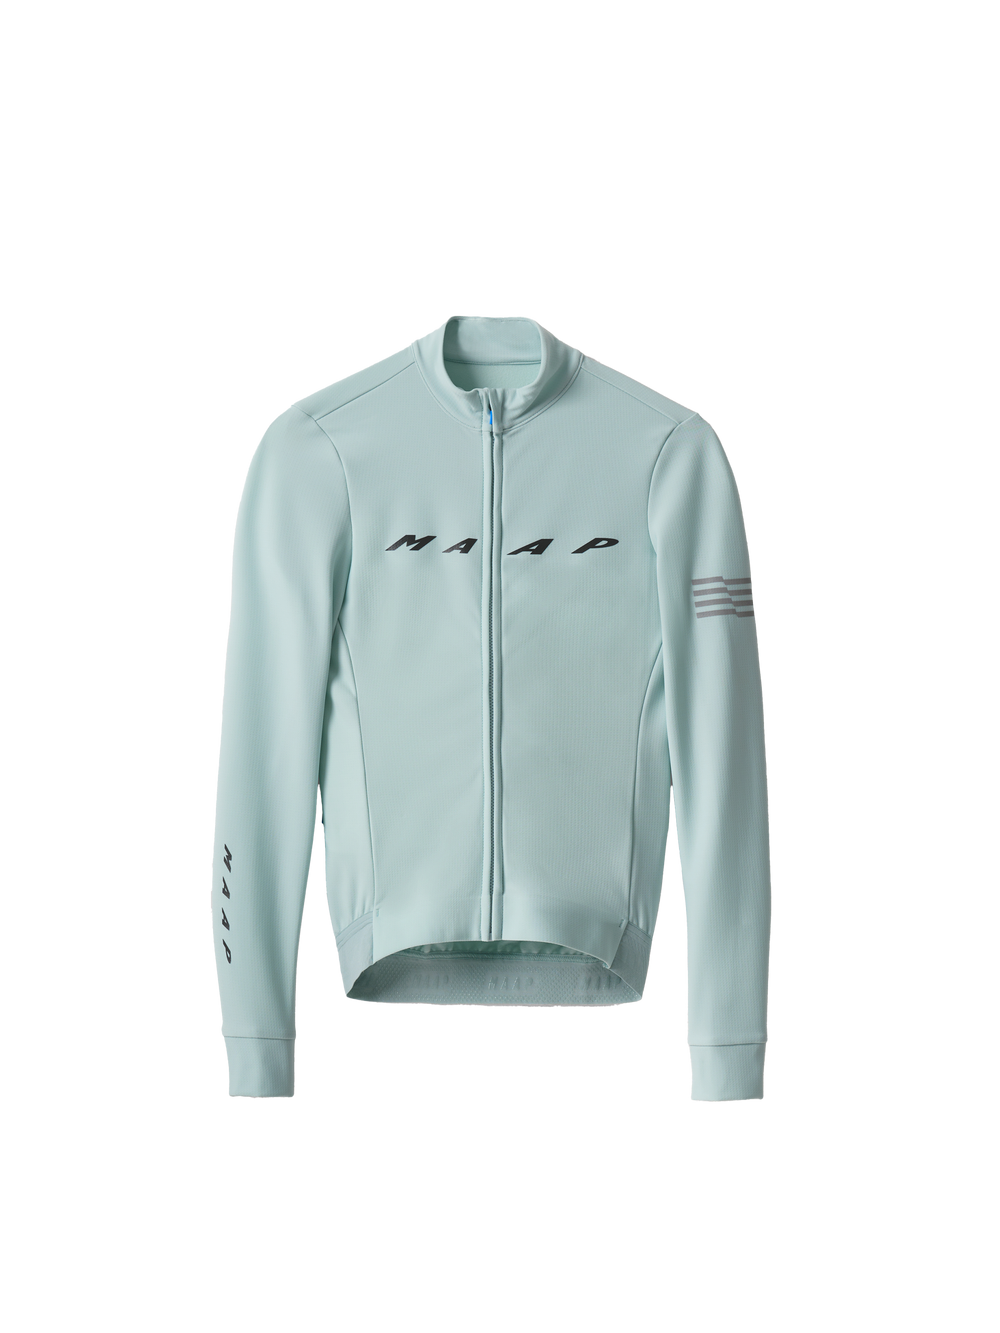 Product Image for Women's Evade Thermal LS Jersey 2.0